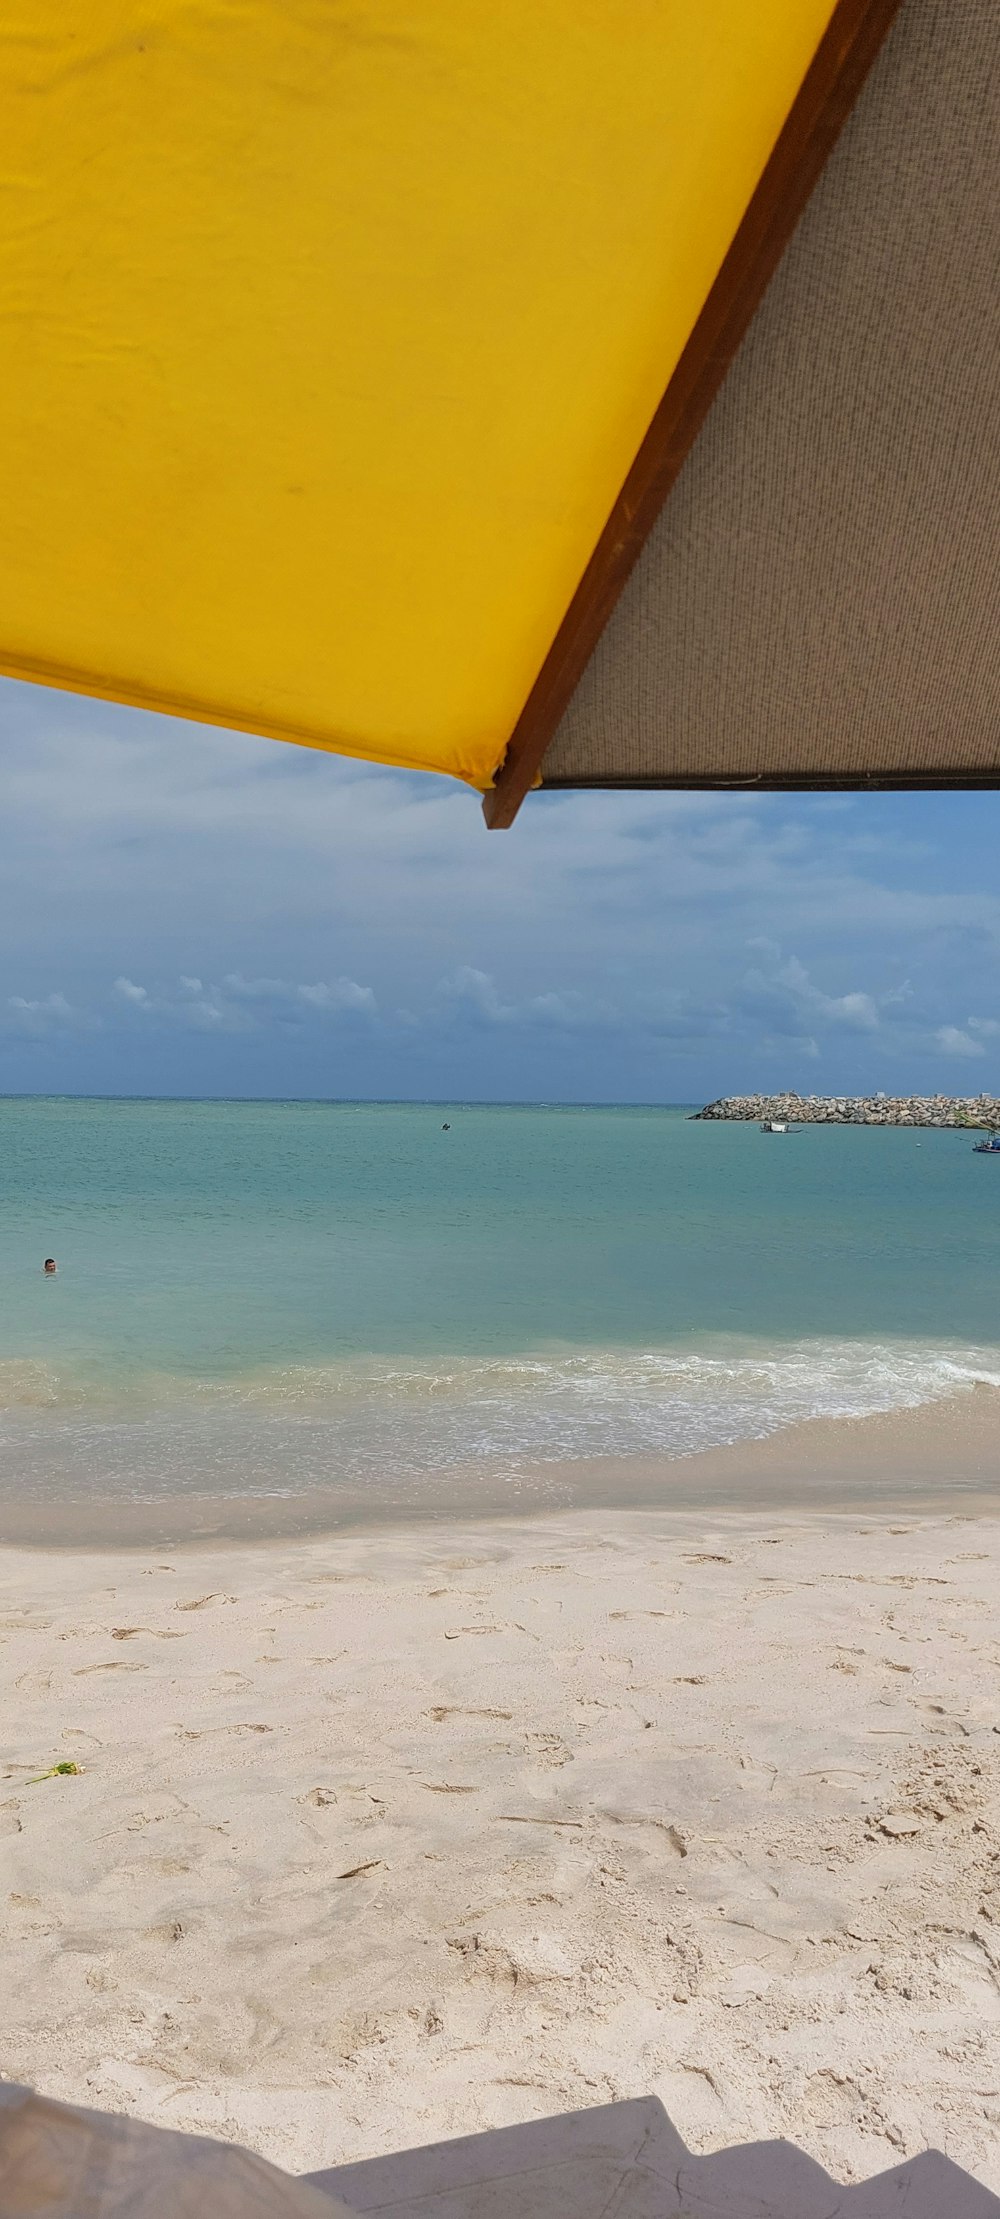 a view of the beach from under a yellow umbrella